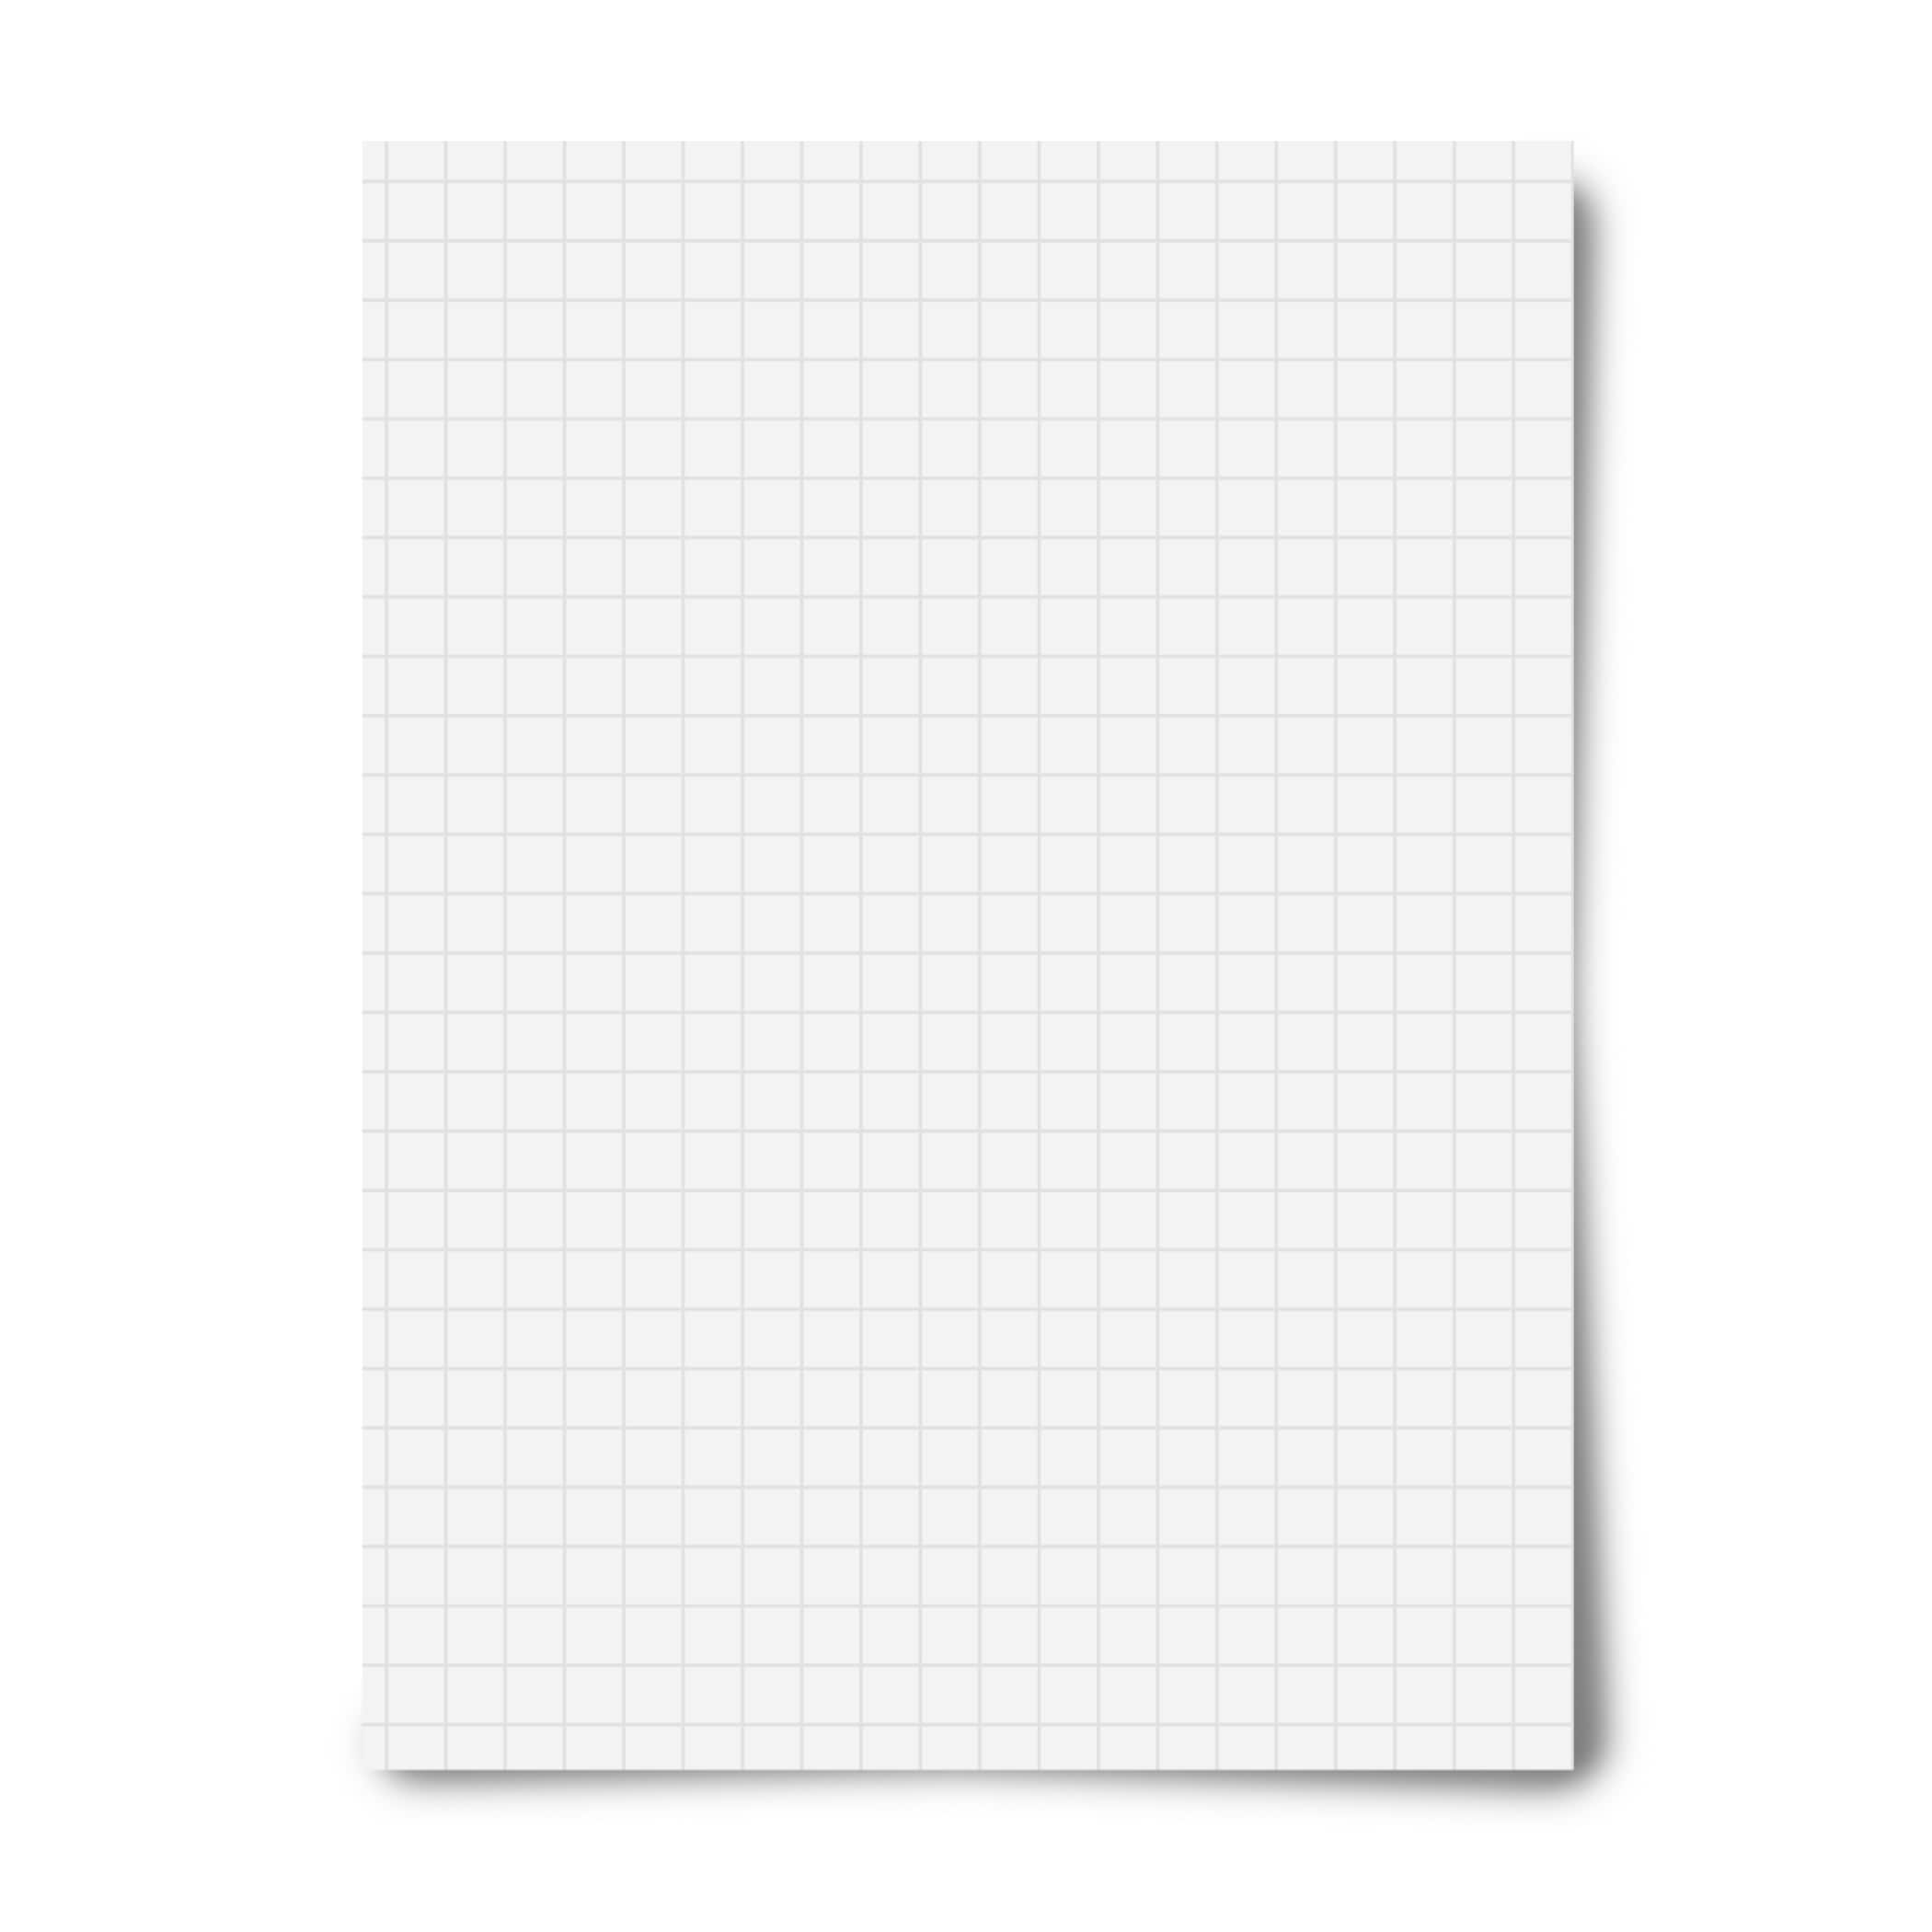 Royal Brites 24324 14 x 22 White Poster Board - 8/Pack